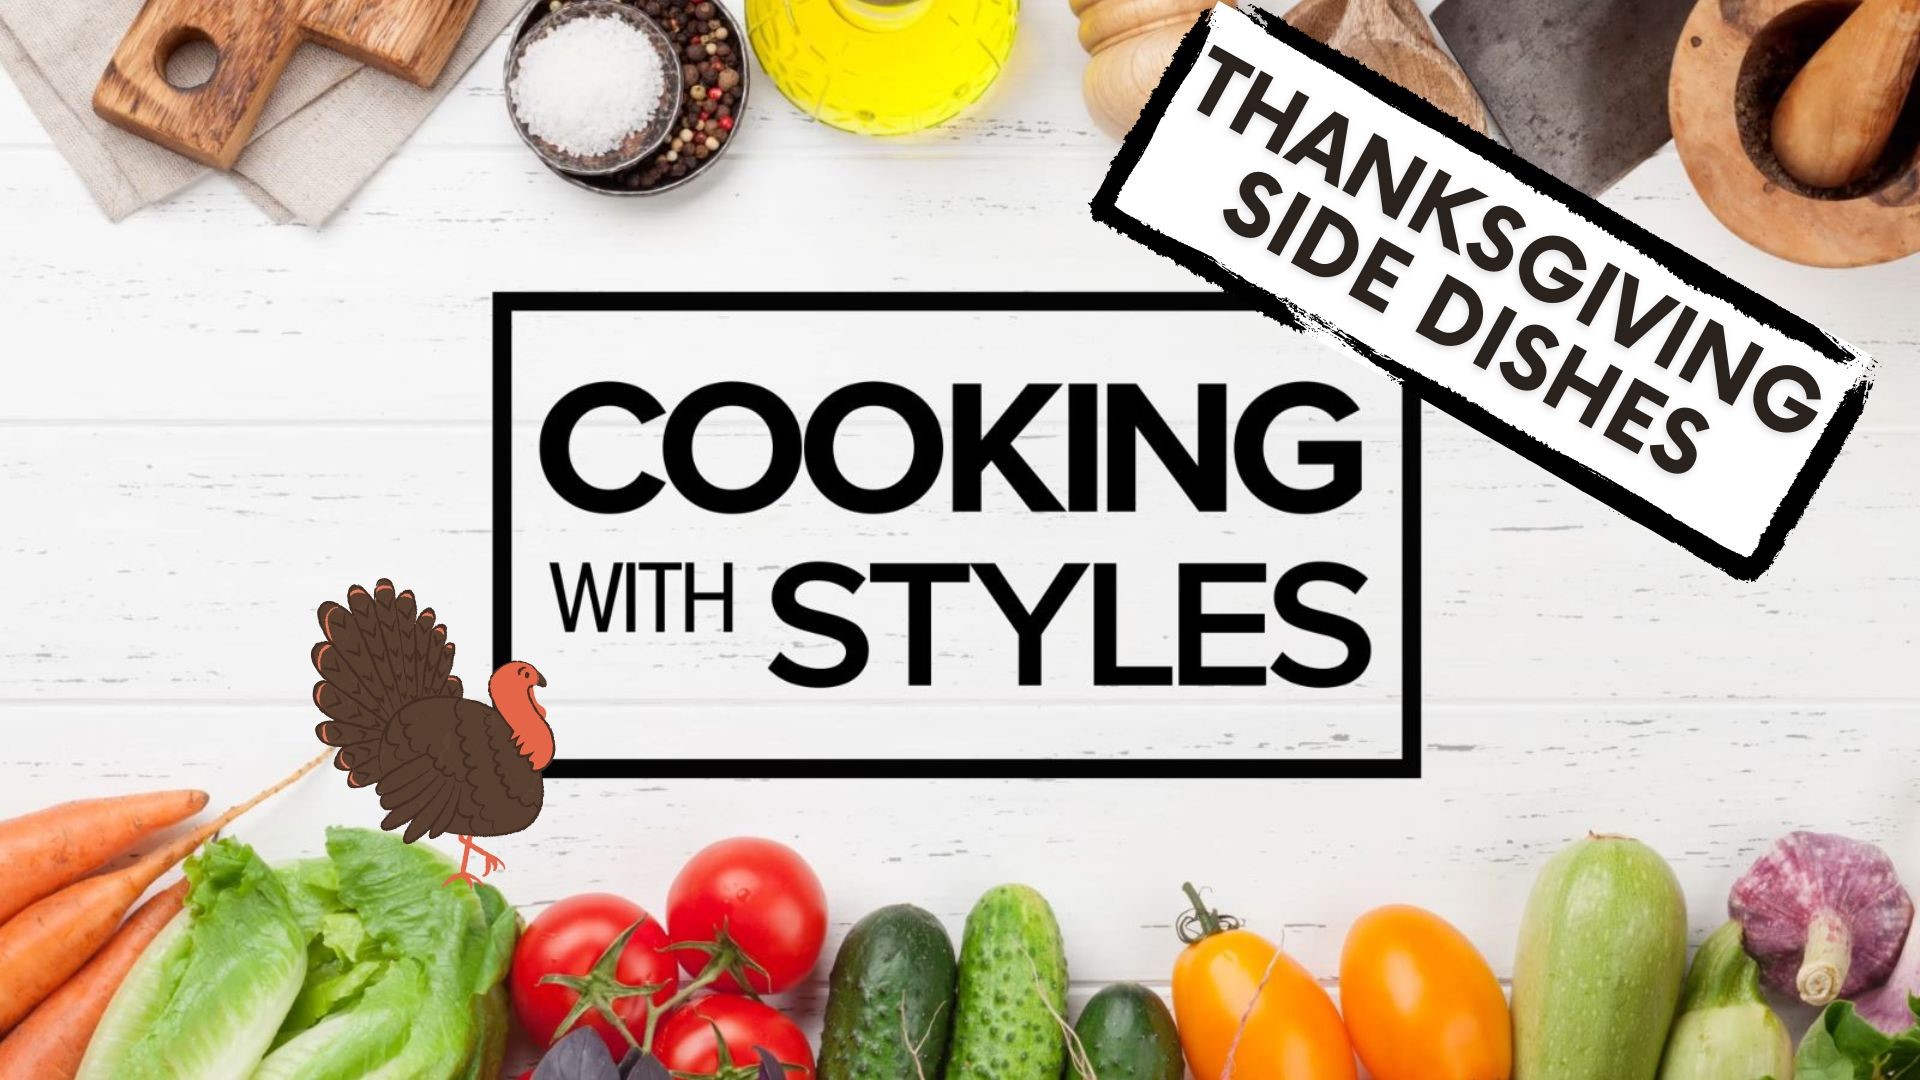 KFMB's Shawn Styles shares his recipes for Thanksgiving side dishes that are sure to wow. From leeks au gratin to yams and potatoes, he has something for everyone.